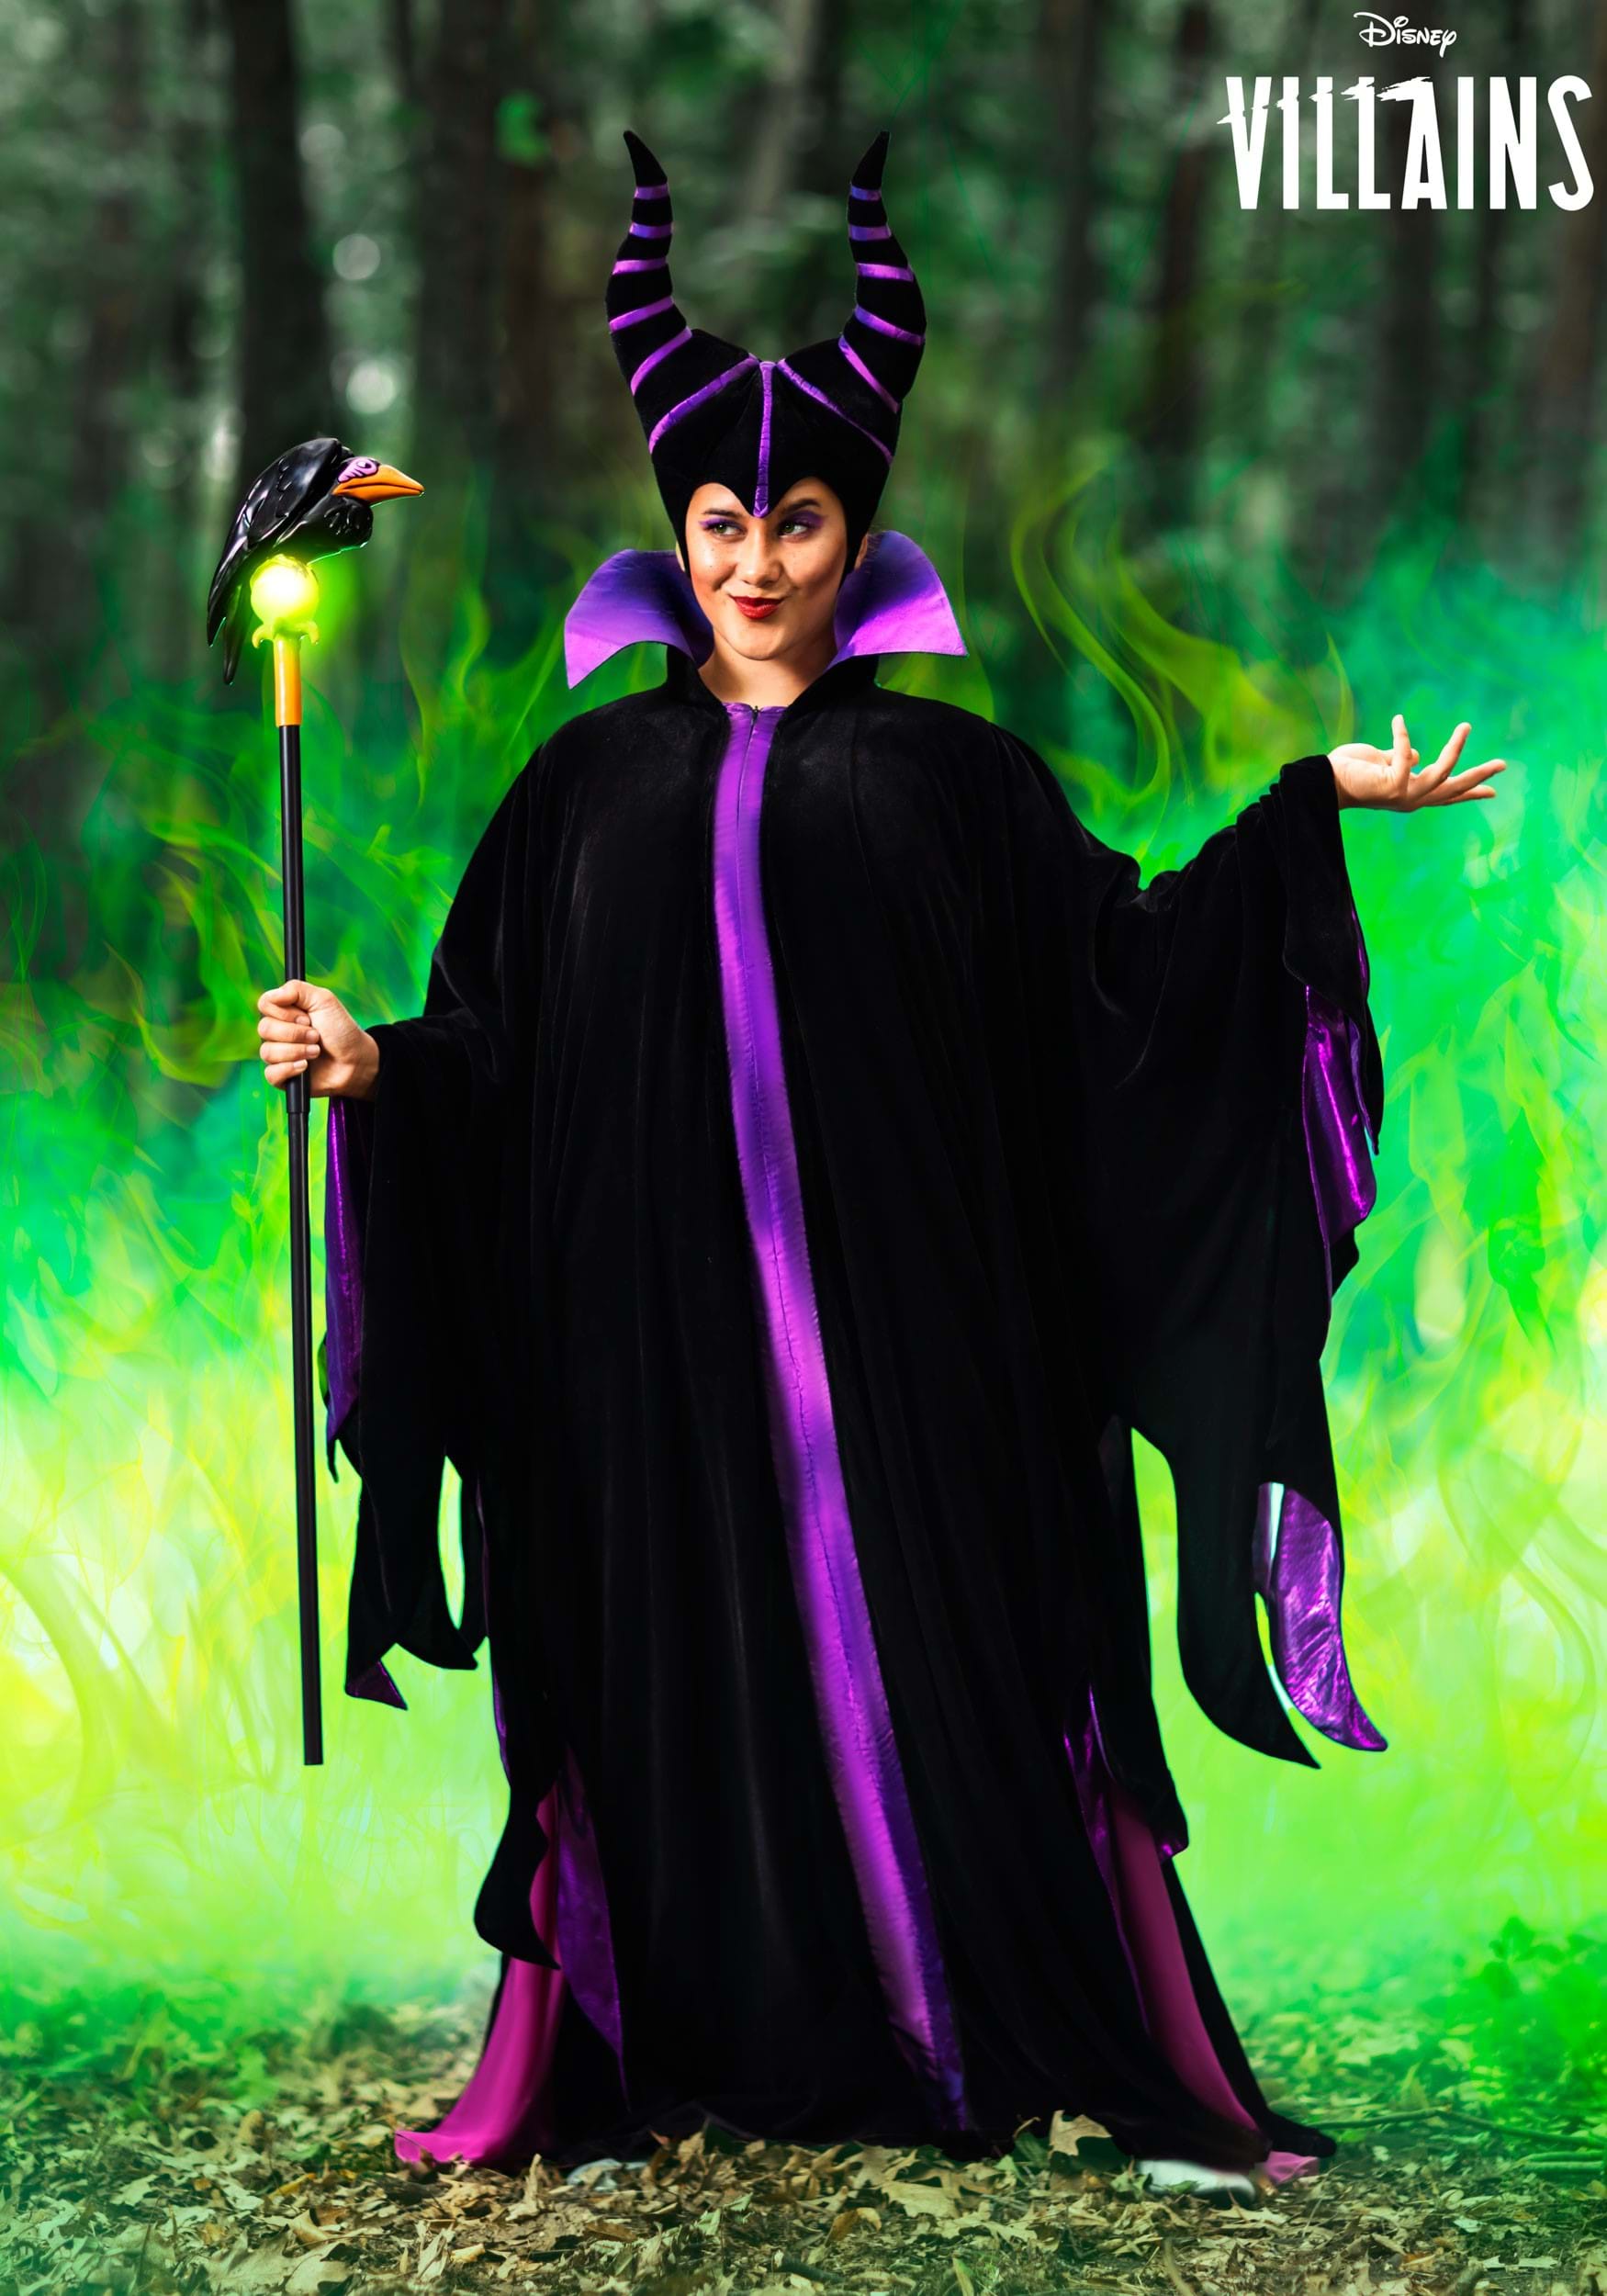 PHOTOS: New Evil Queen and Maleficent Loungefly Backpacks Cast a